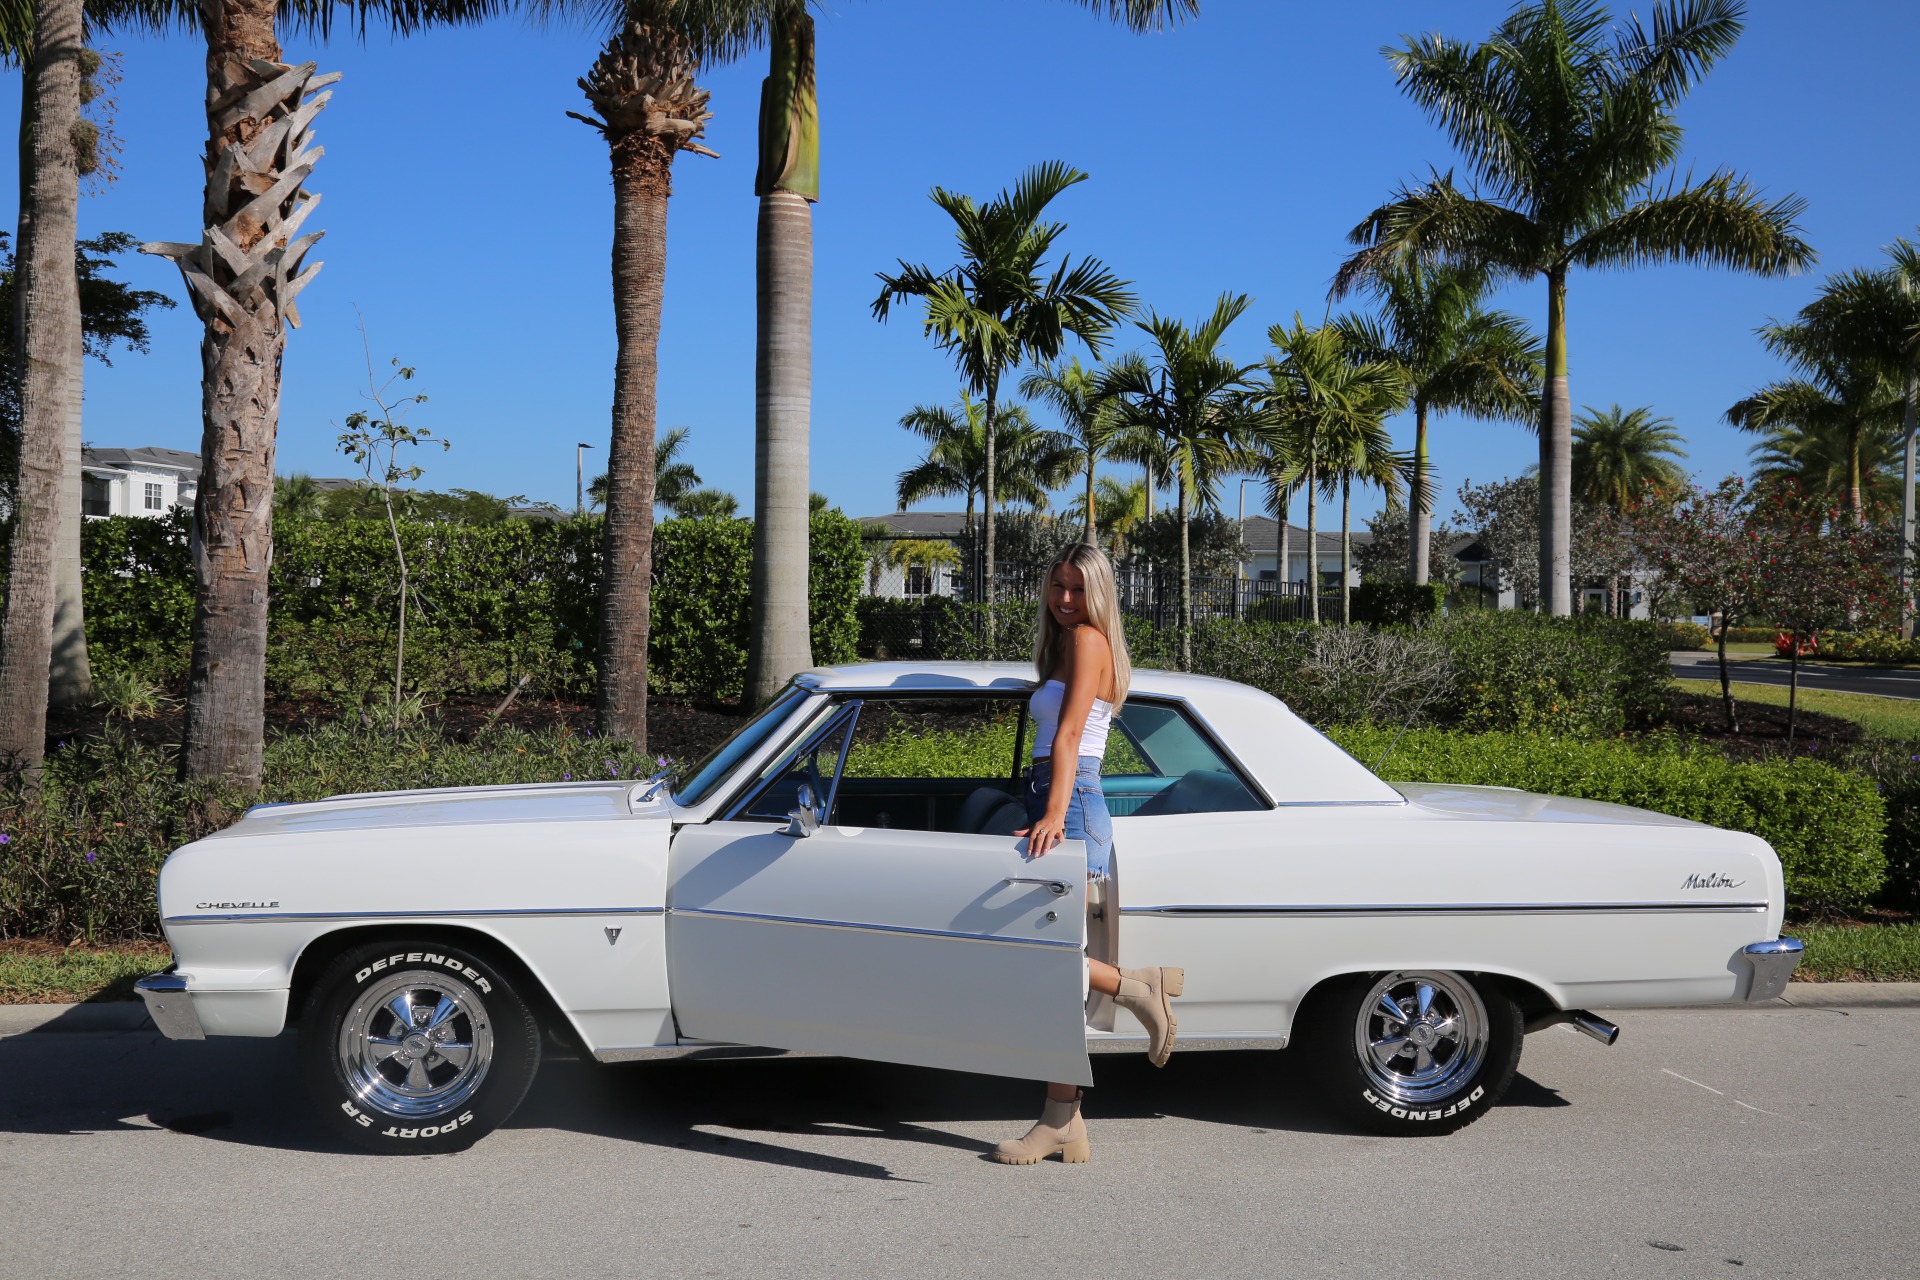 Used 1964 Chevrolet Chevelle Malibu V8 ZZ383 Engine  5 speed Manual Tremic for sale Sold at Muscle Cars for Sale Inc. in Fort Myers FL 33912 4